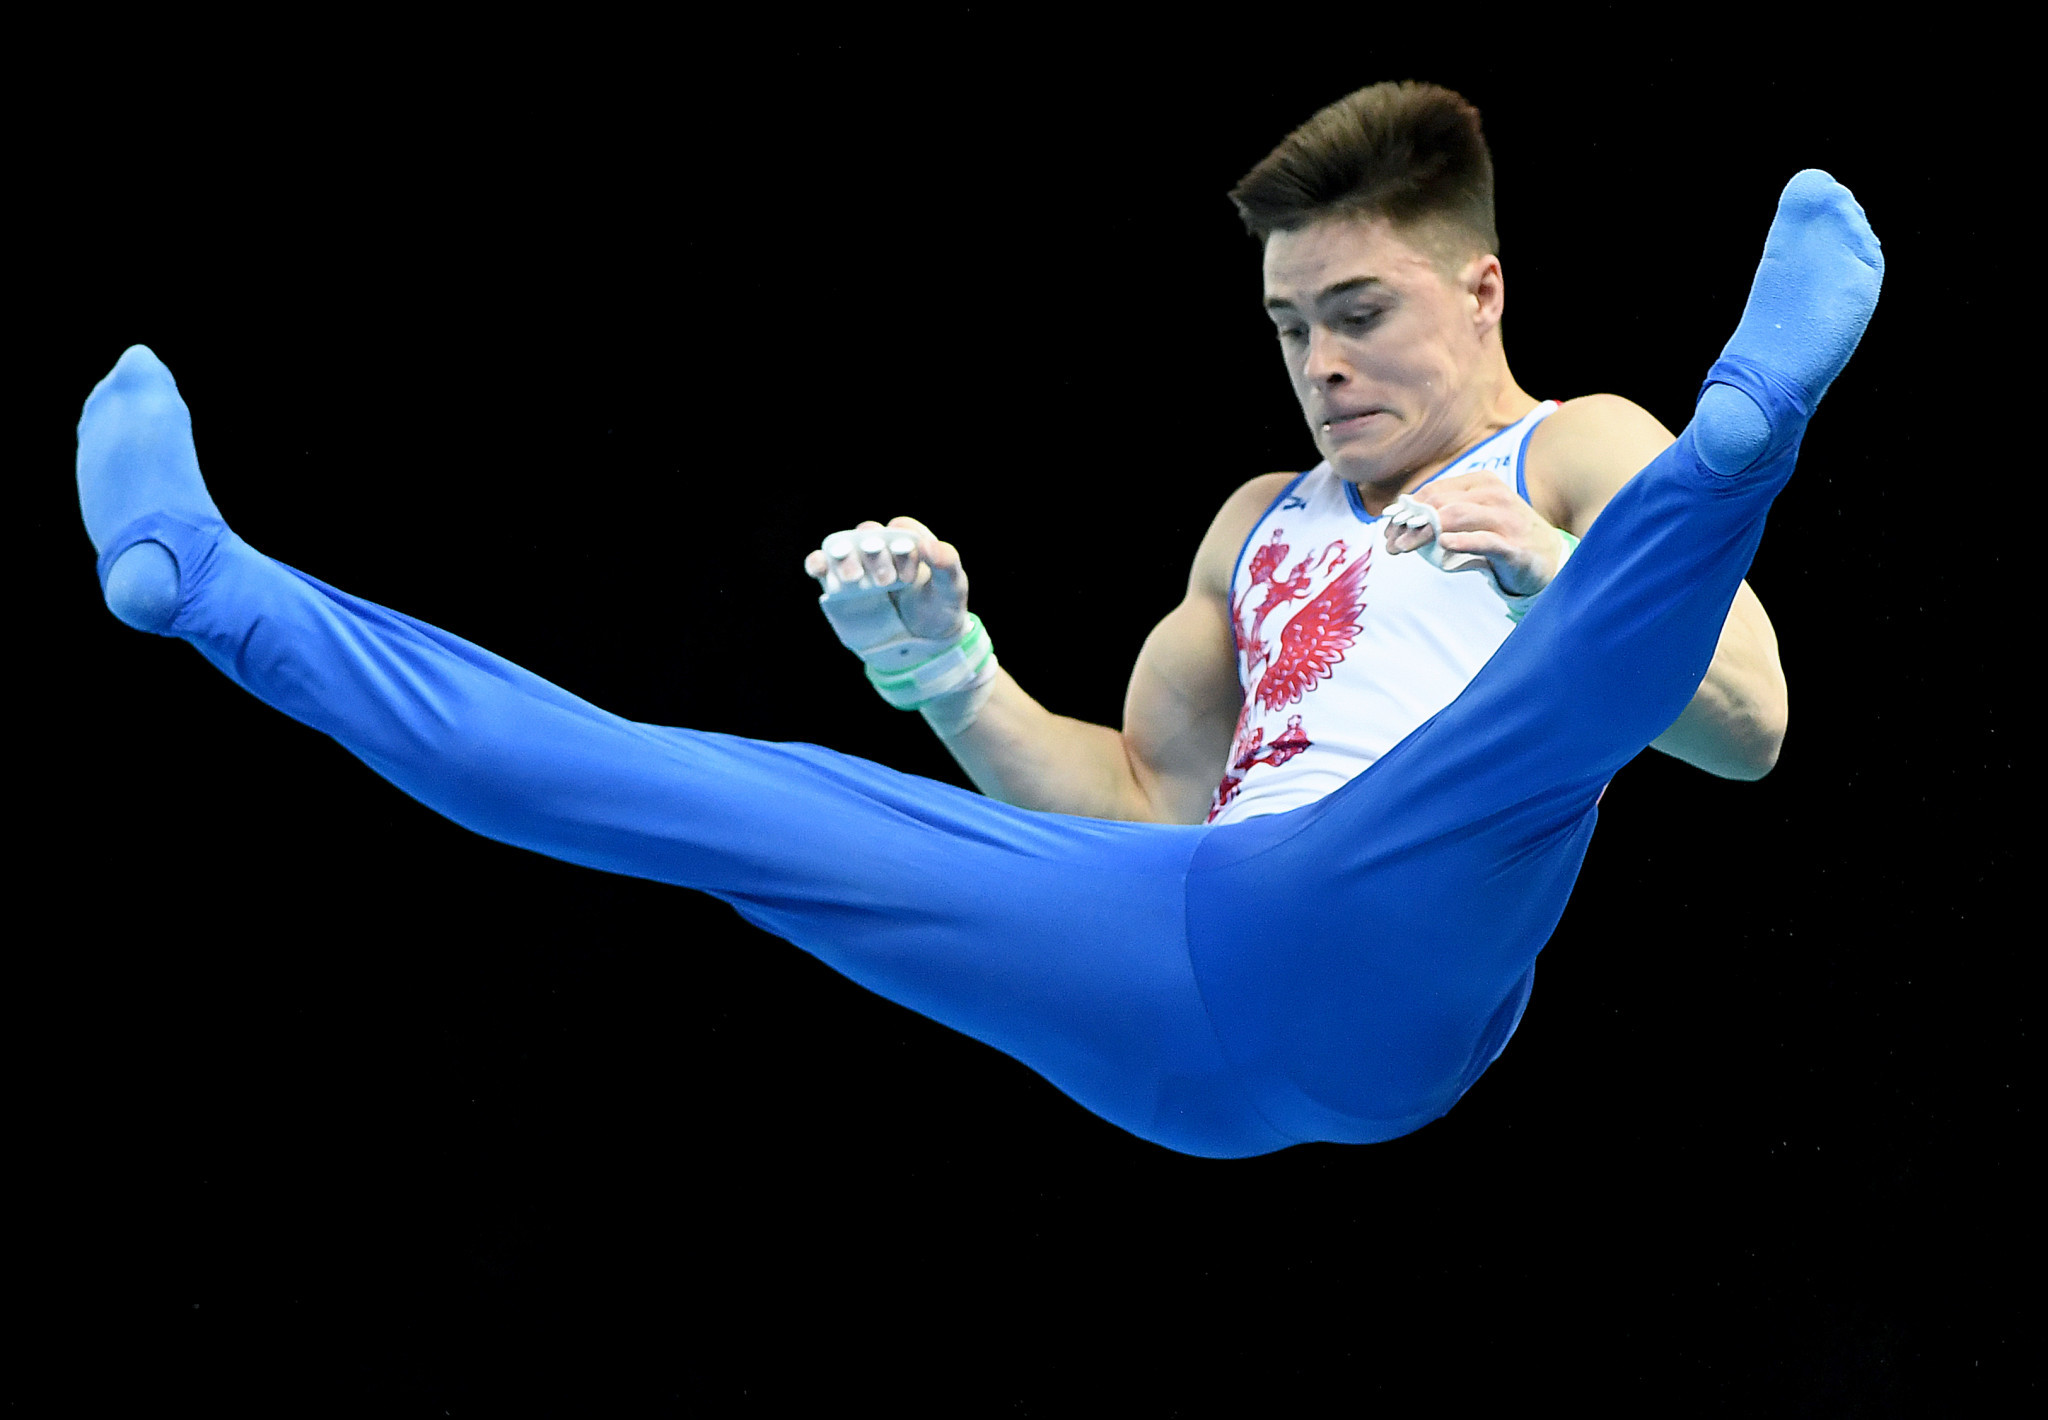 Nagornyy adds parallel bars to all-around title at European Artistic Gymnastics Individual Championships